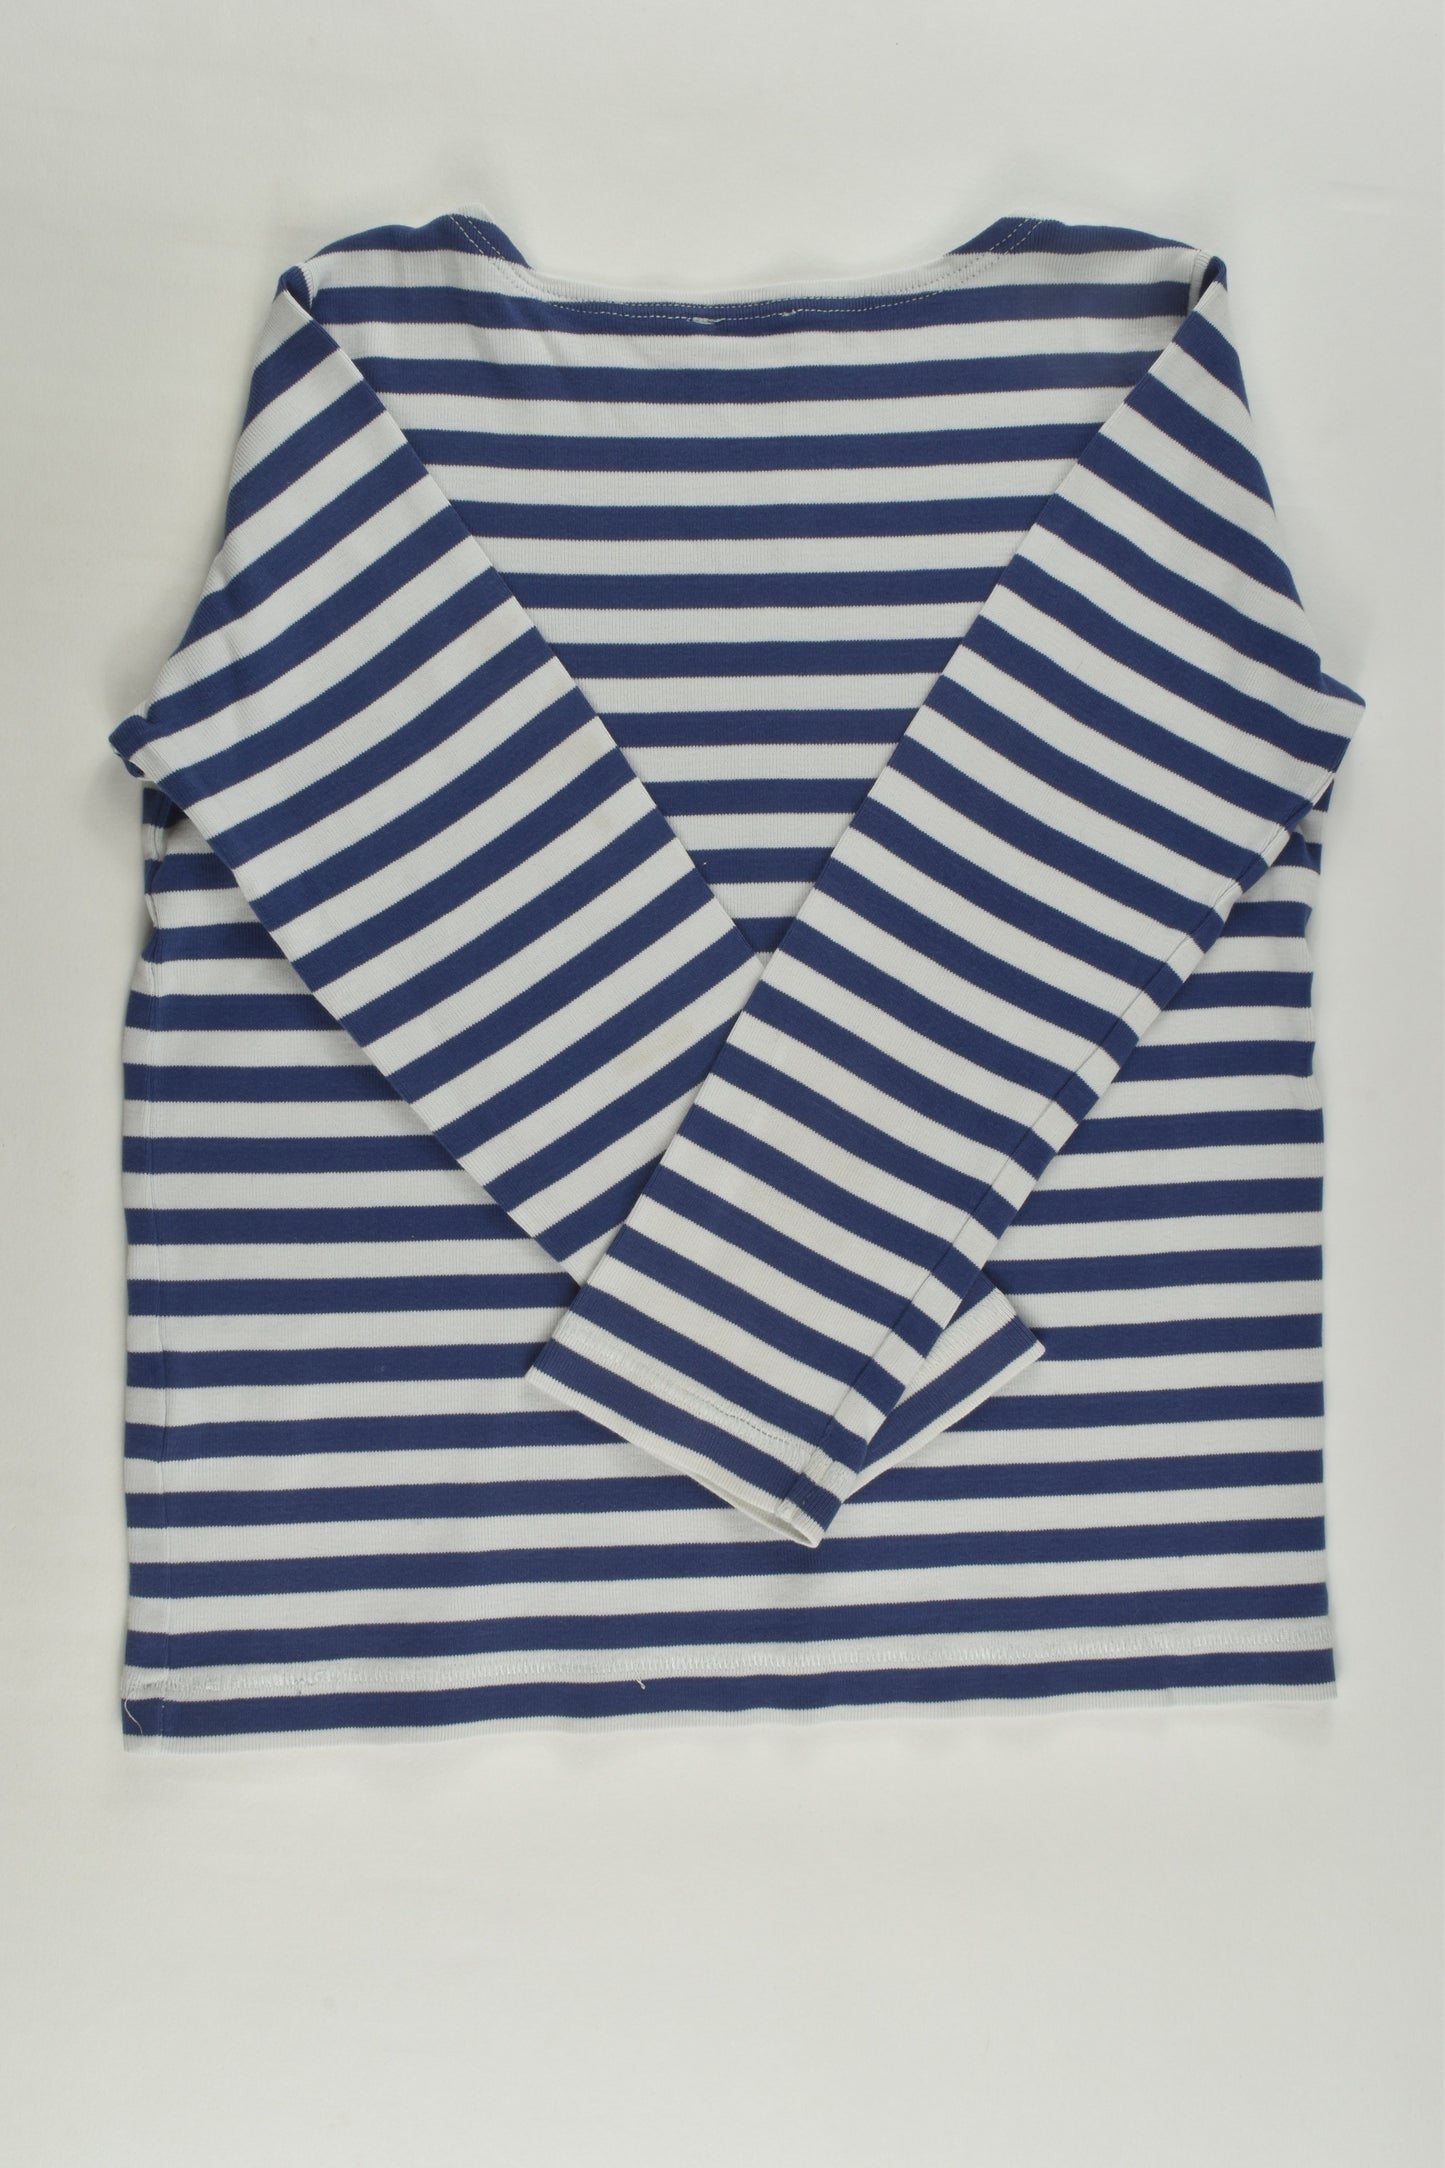 COS Size 5 (110 cm) Striped Top